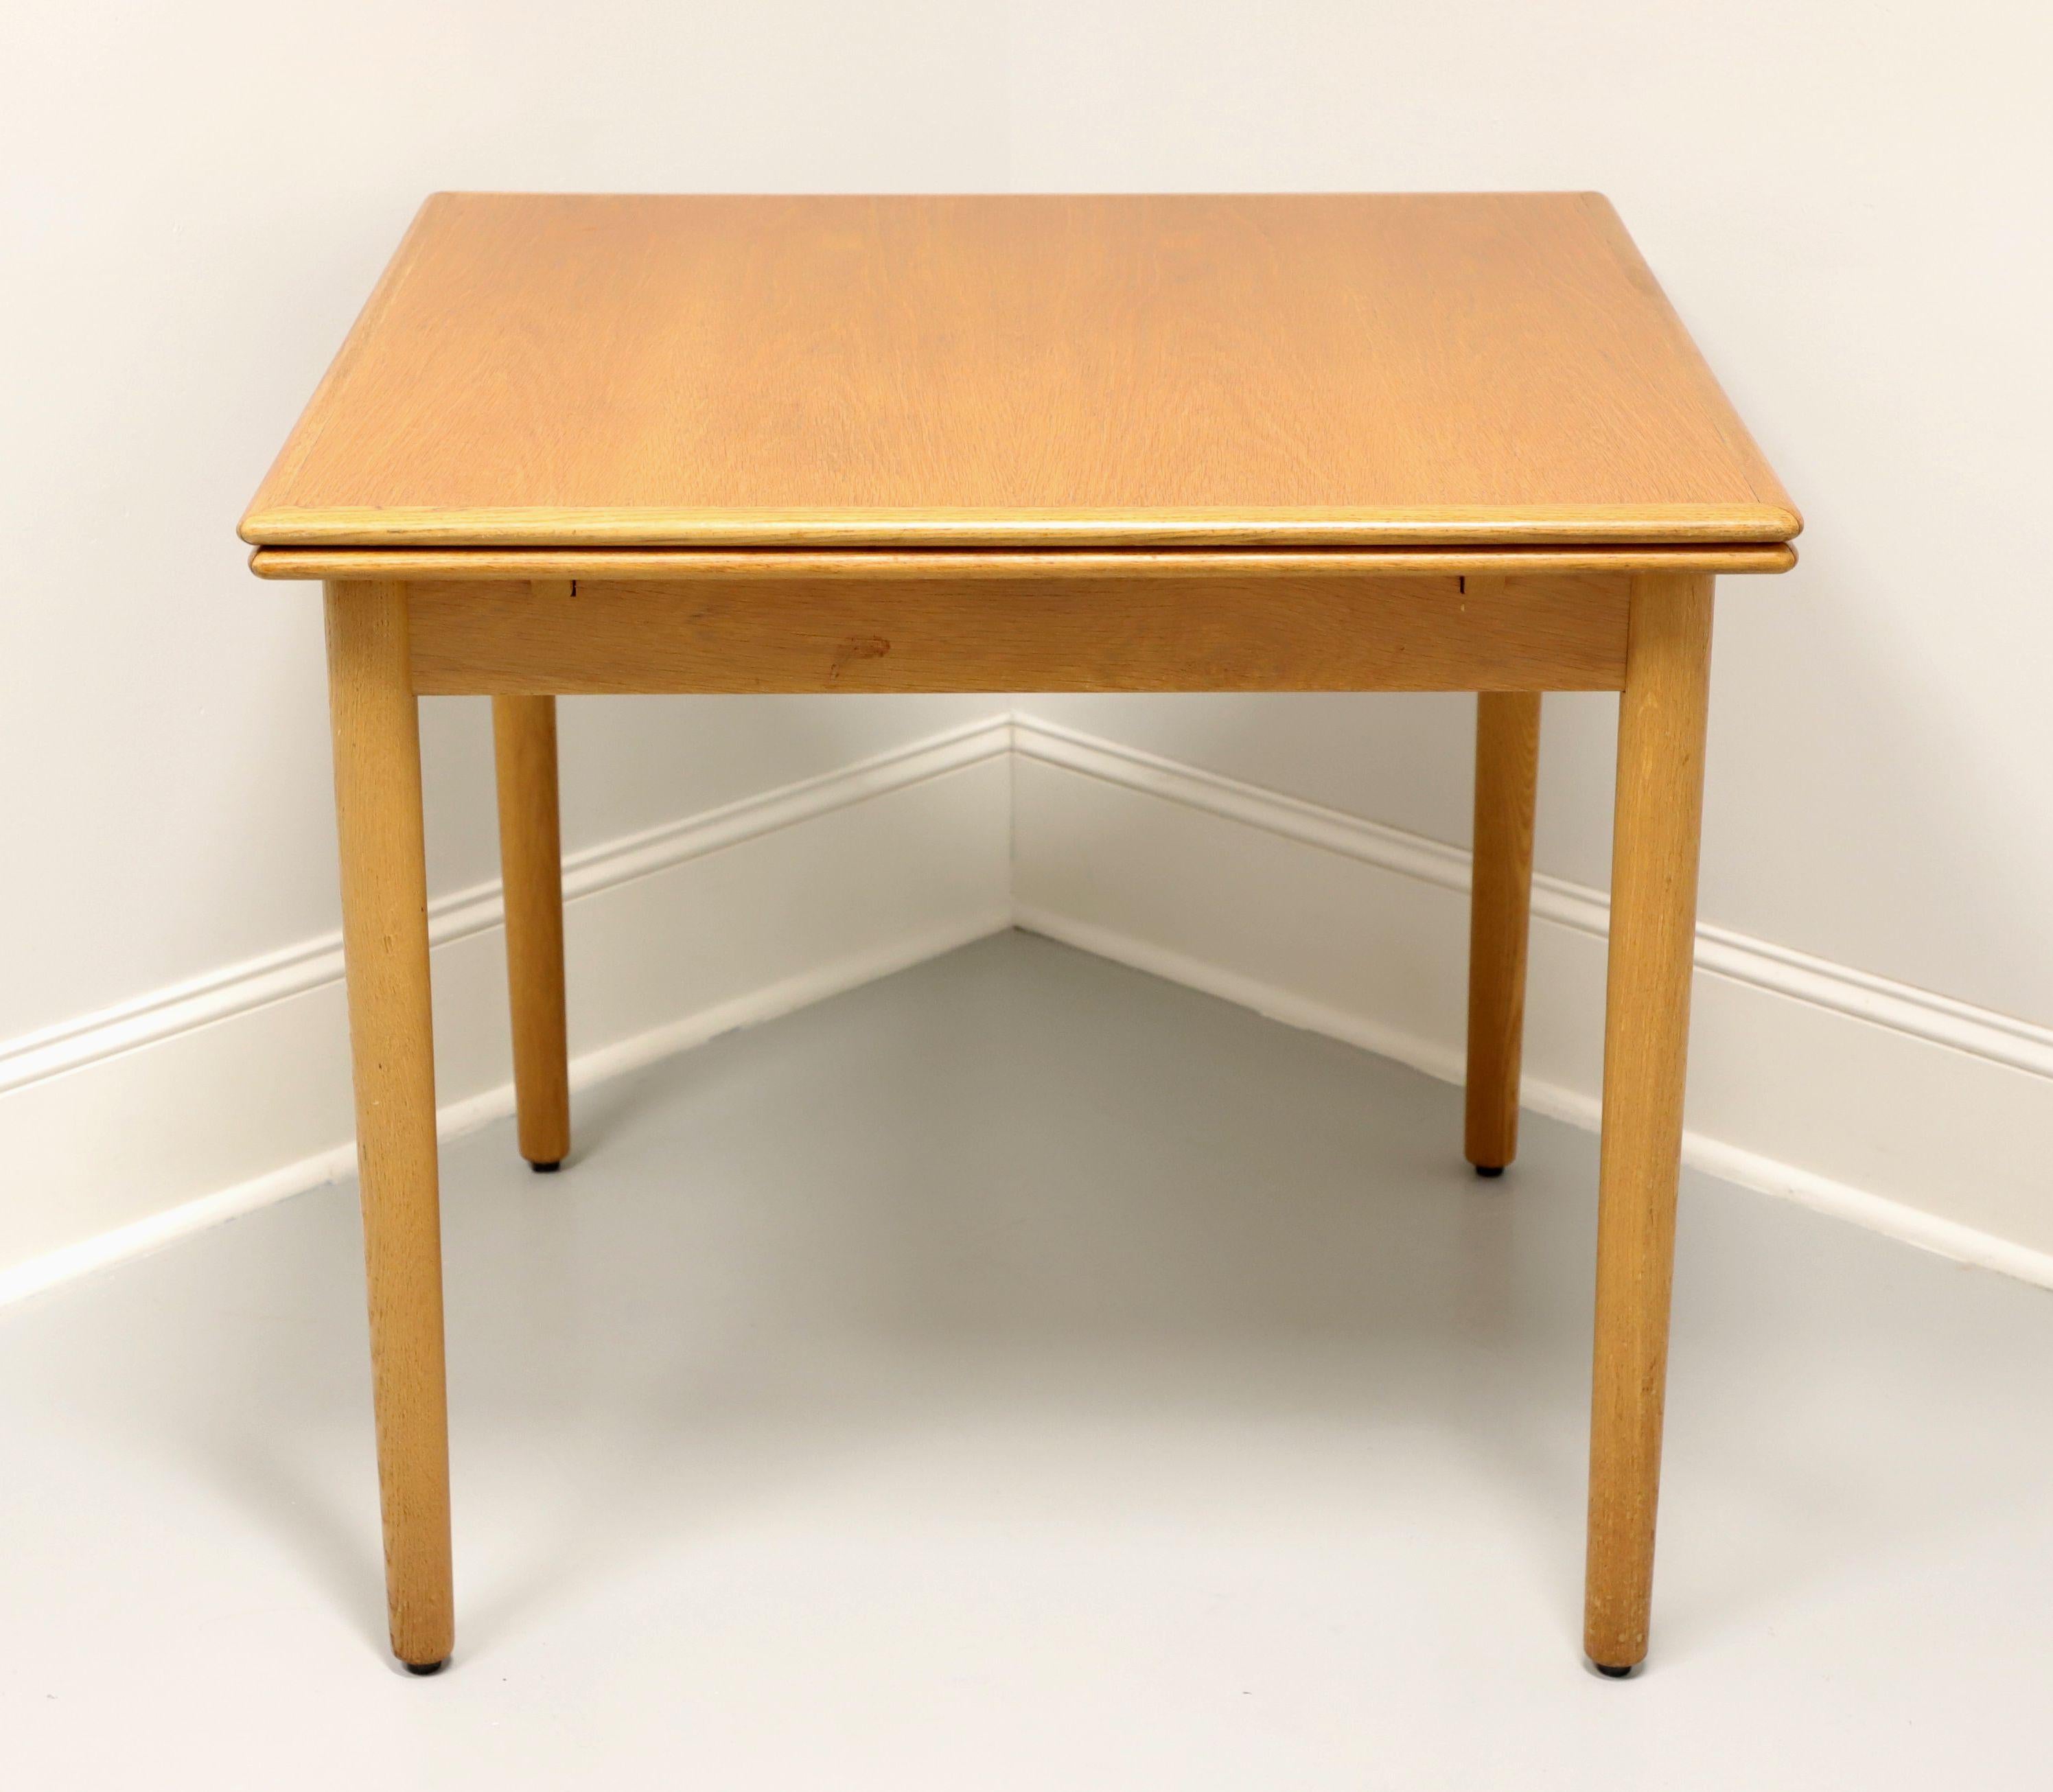 A mid 20th century Danish Modern square drawtop dining table, unbranded. Solid oak with a banded top, two drawtop leaves that pull out from either end of the table by lifting the top, and rounded straight legs. Has two internally stored drawtop